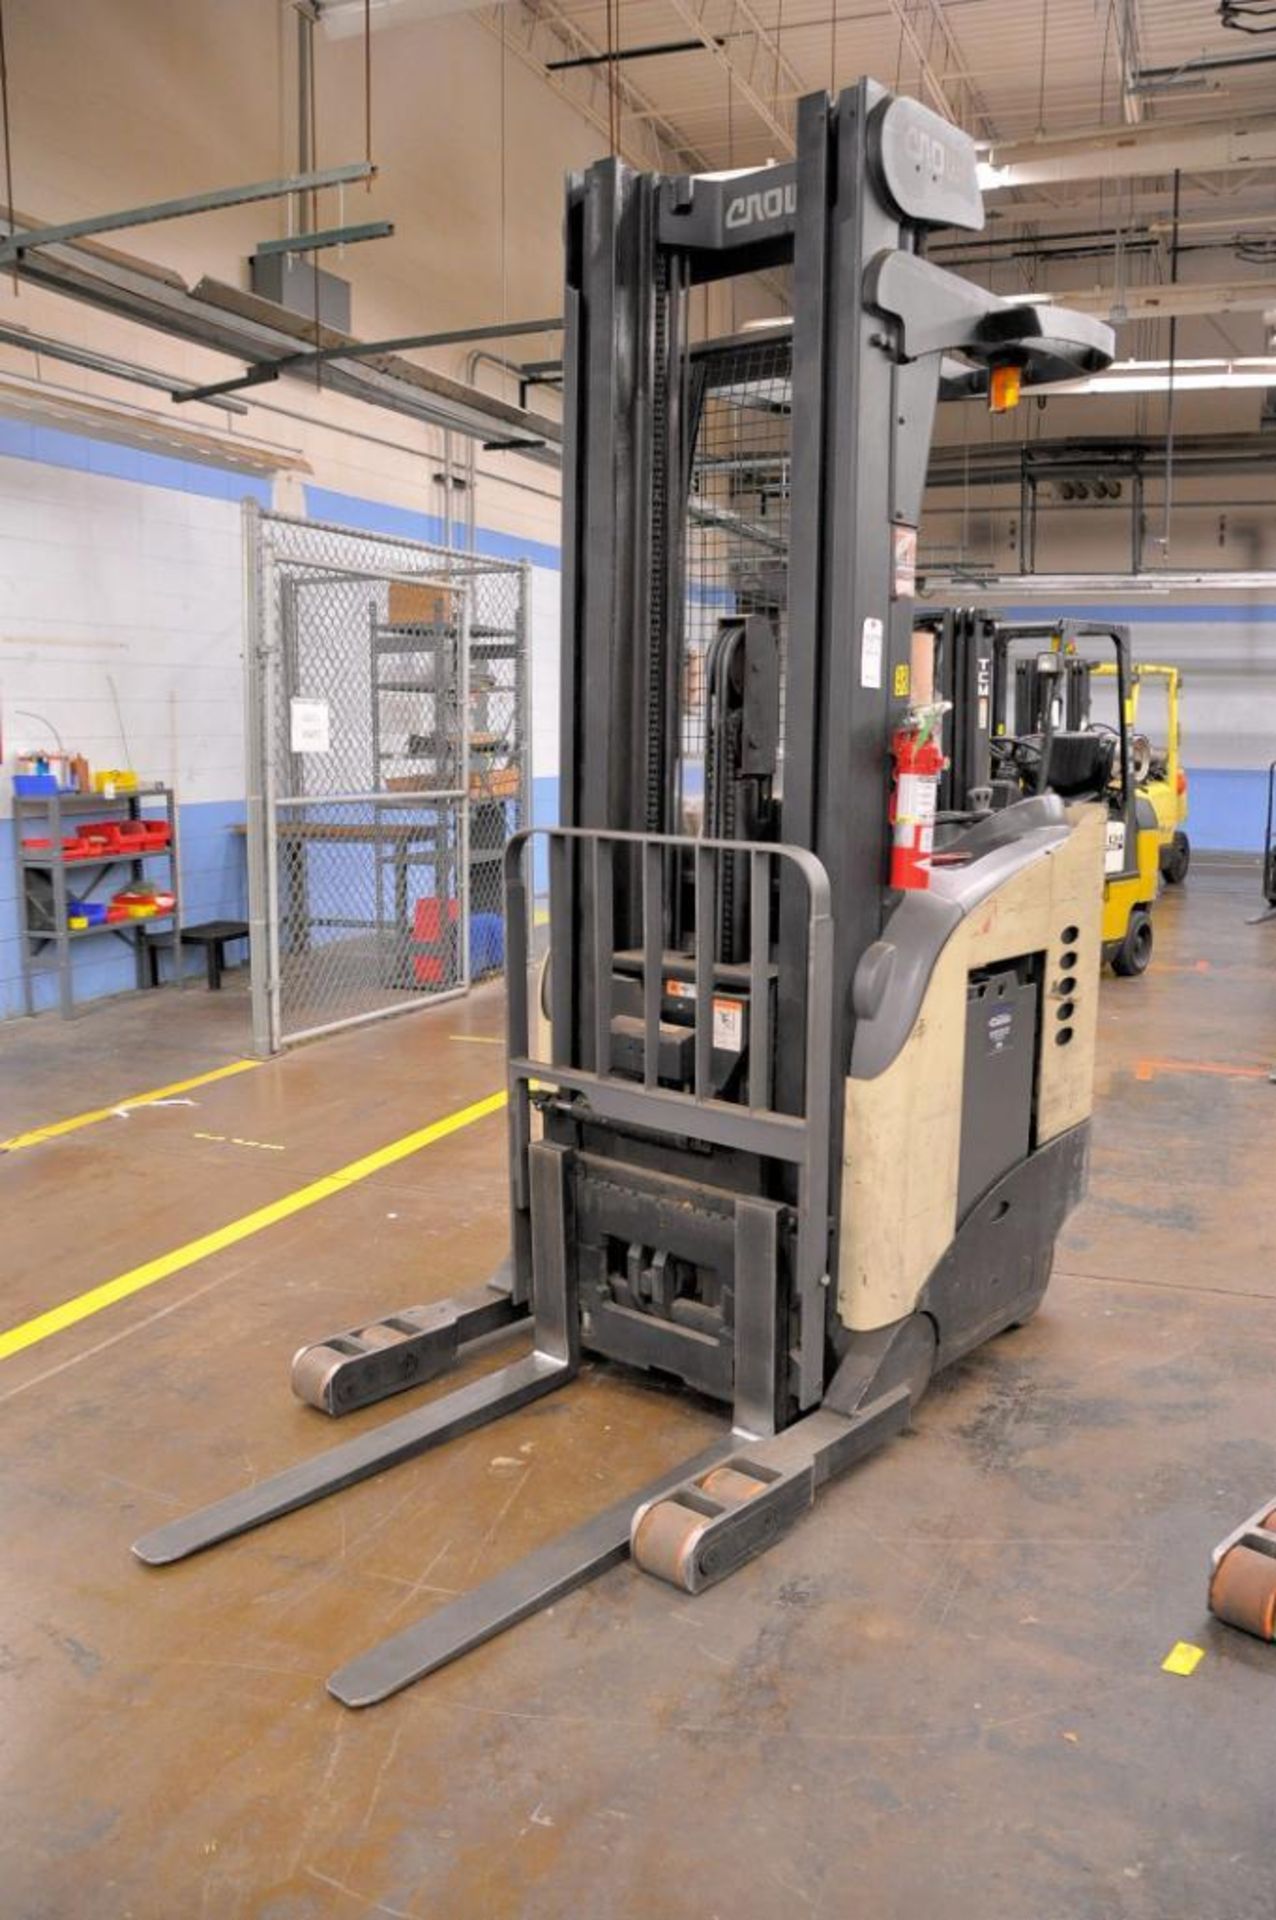 Crown 5200 Series 3,000-lb. Capacity Electric Standup Forklift Truck, S/N: 1A248393